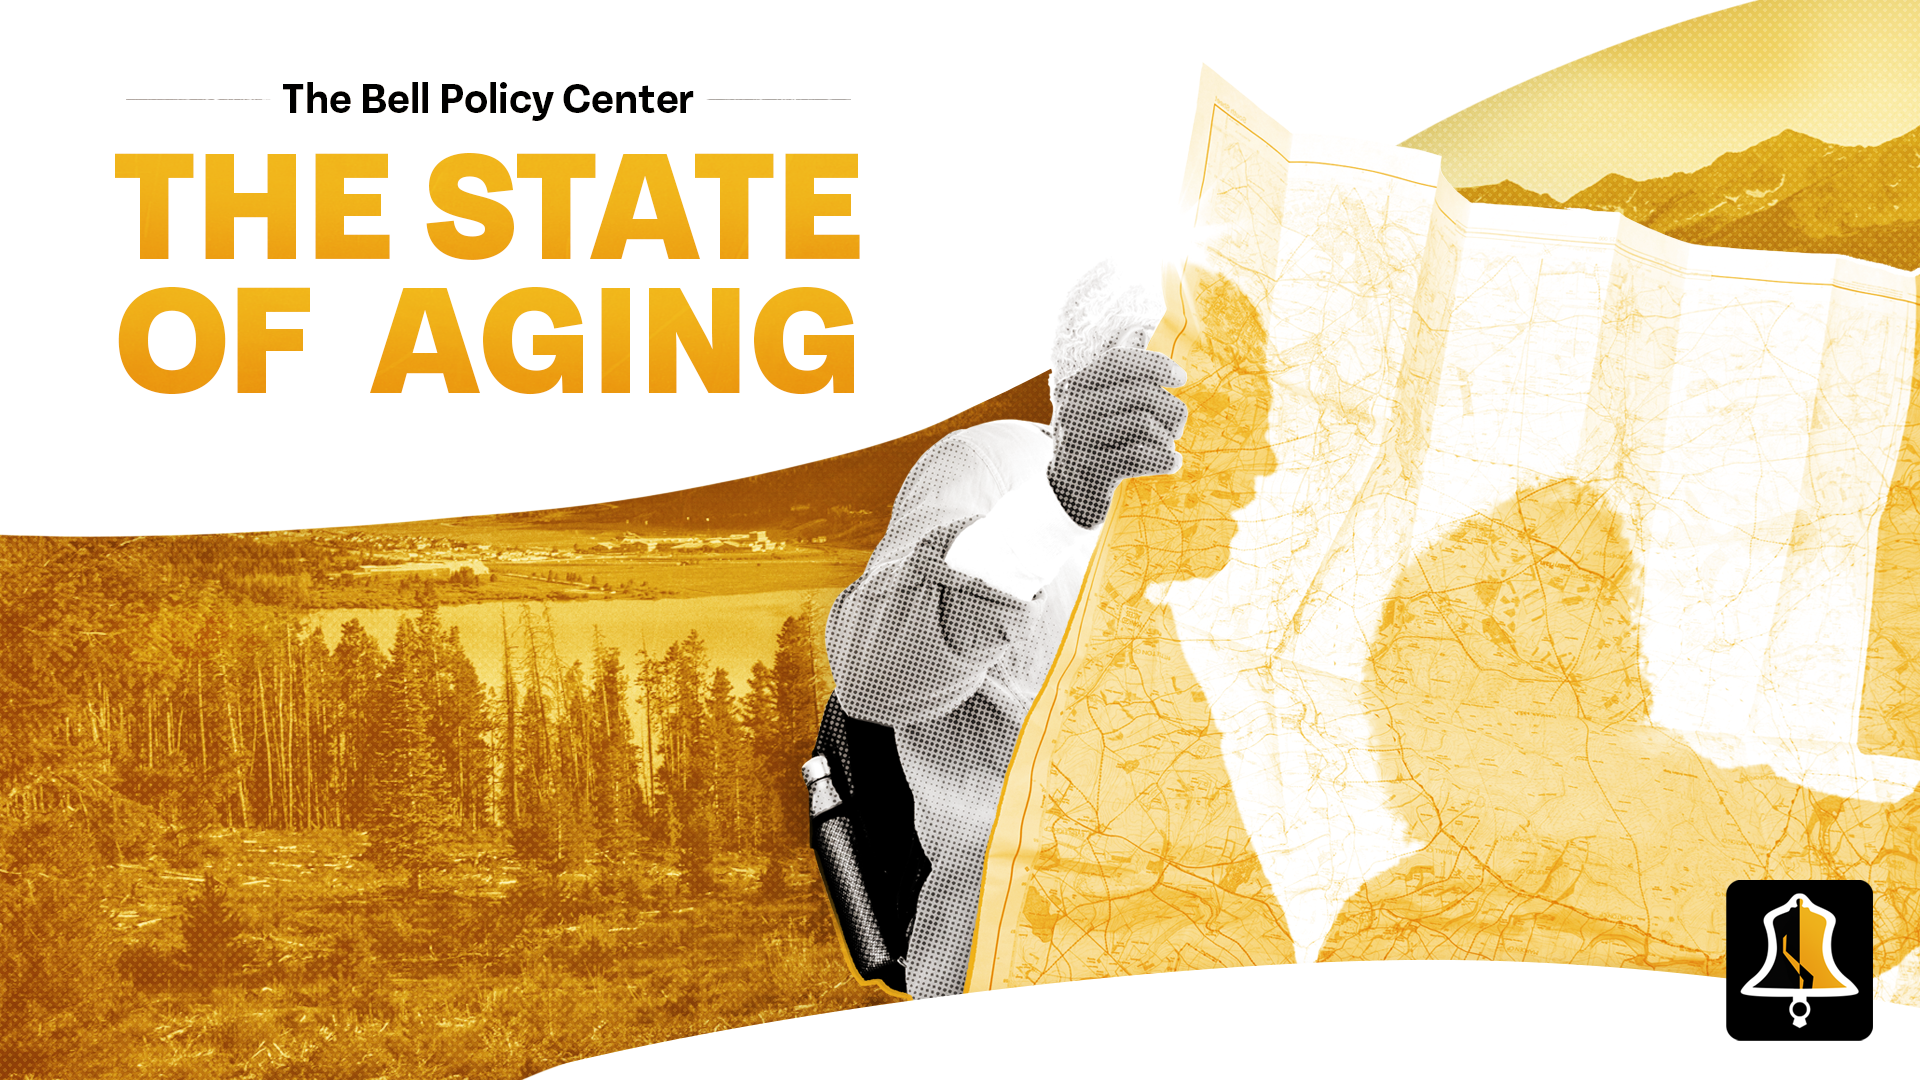 Graphic illustration for the bell policy center's report on 'the state of aging' featuring a silhouette of an elderly person leaning on a cane against a backdrop of a mountainous landscape.